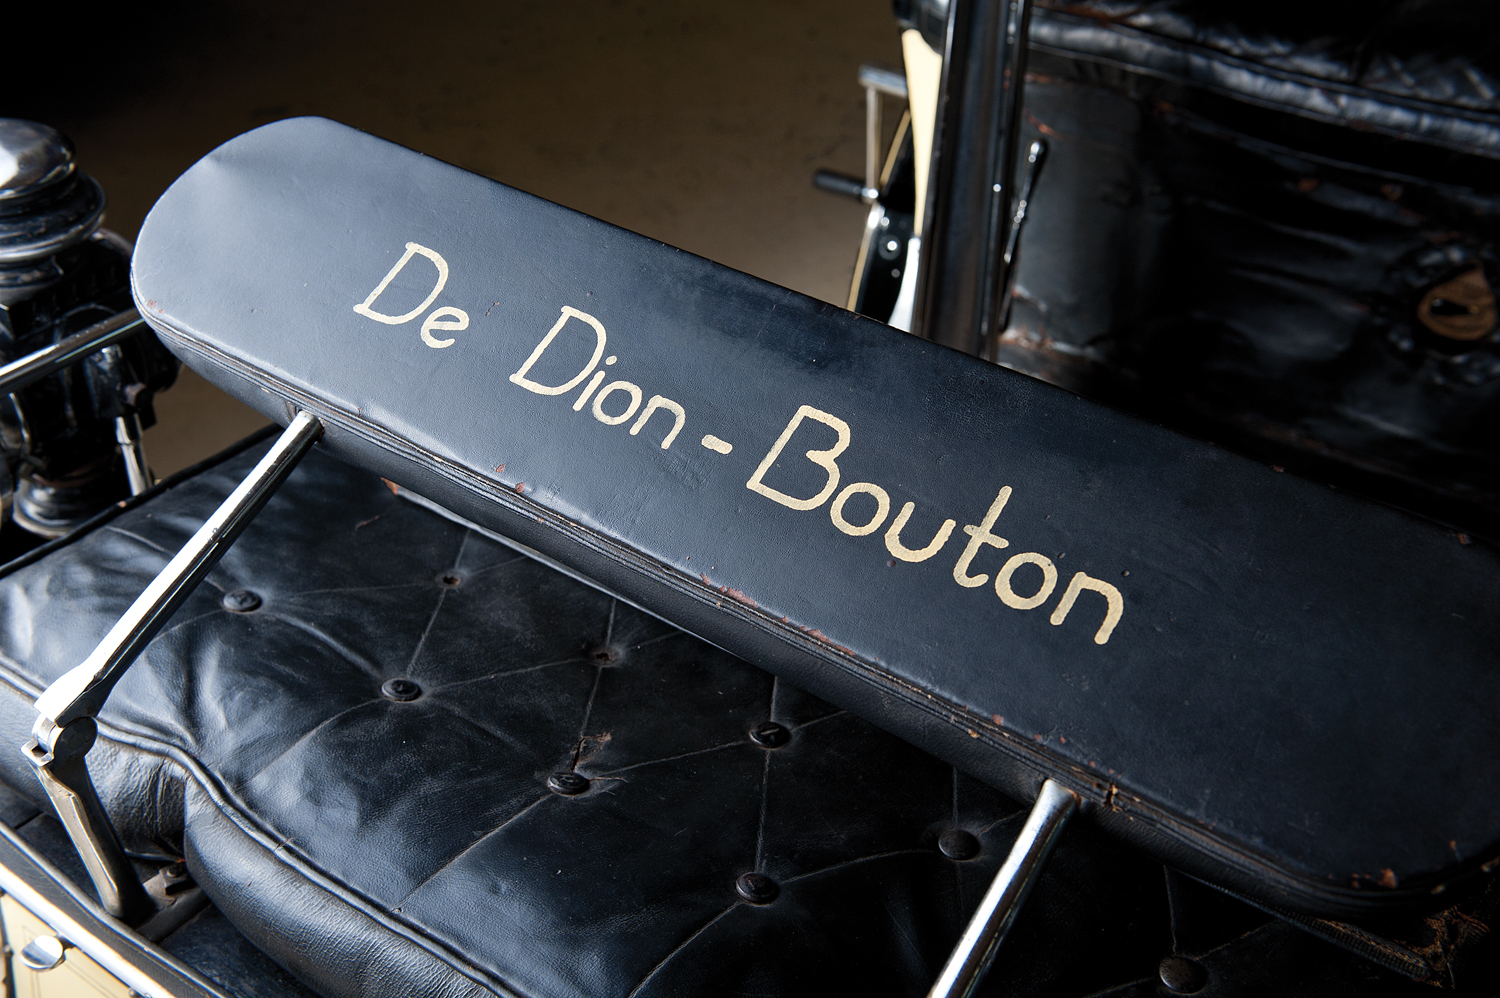 1901 De Dion-Bouton New York Type Motorette, Photo:  RM Sotheby's Aaron Summerfield ©2014 Courtesy of RM Auctions